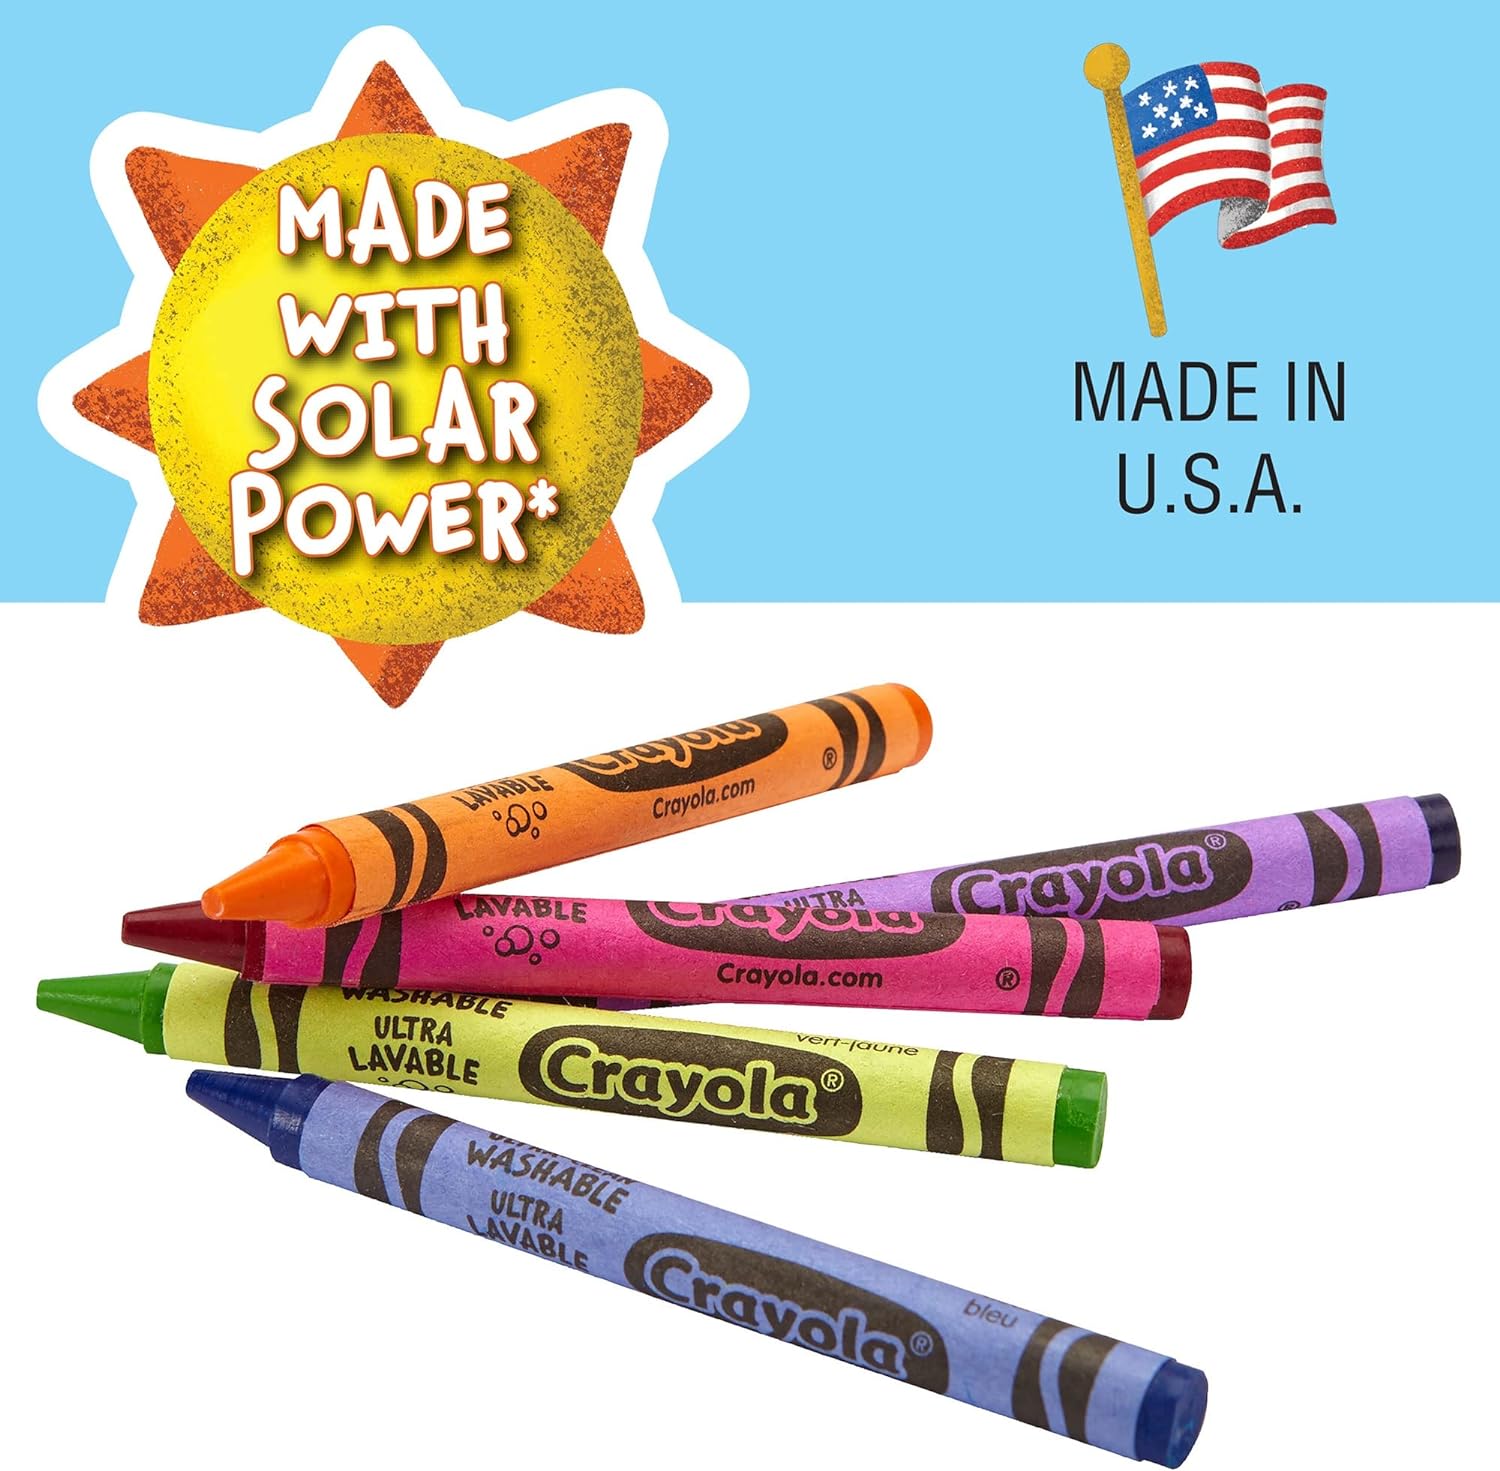 Crayola Ultra-Clean Washable Crayons Pack of 24 526924